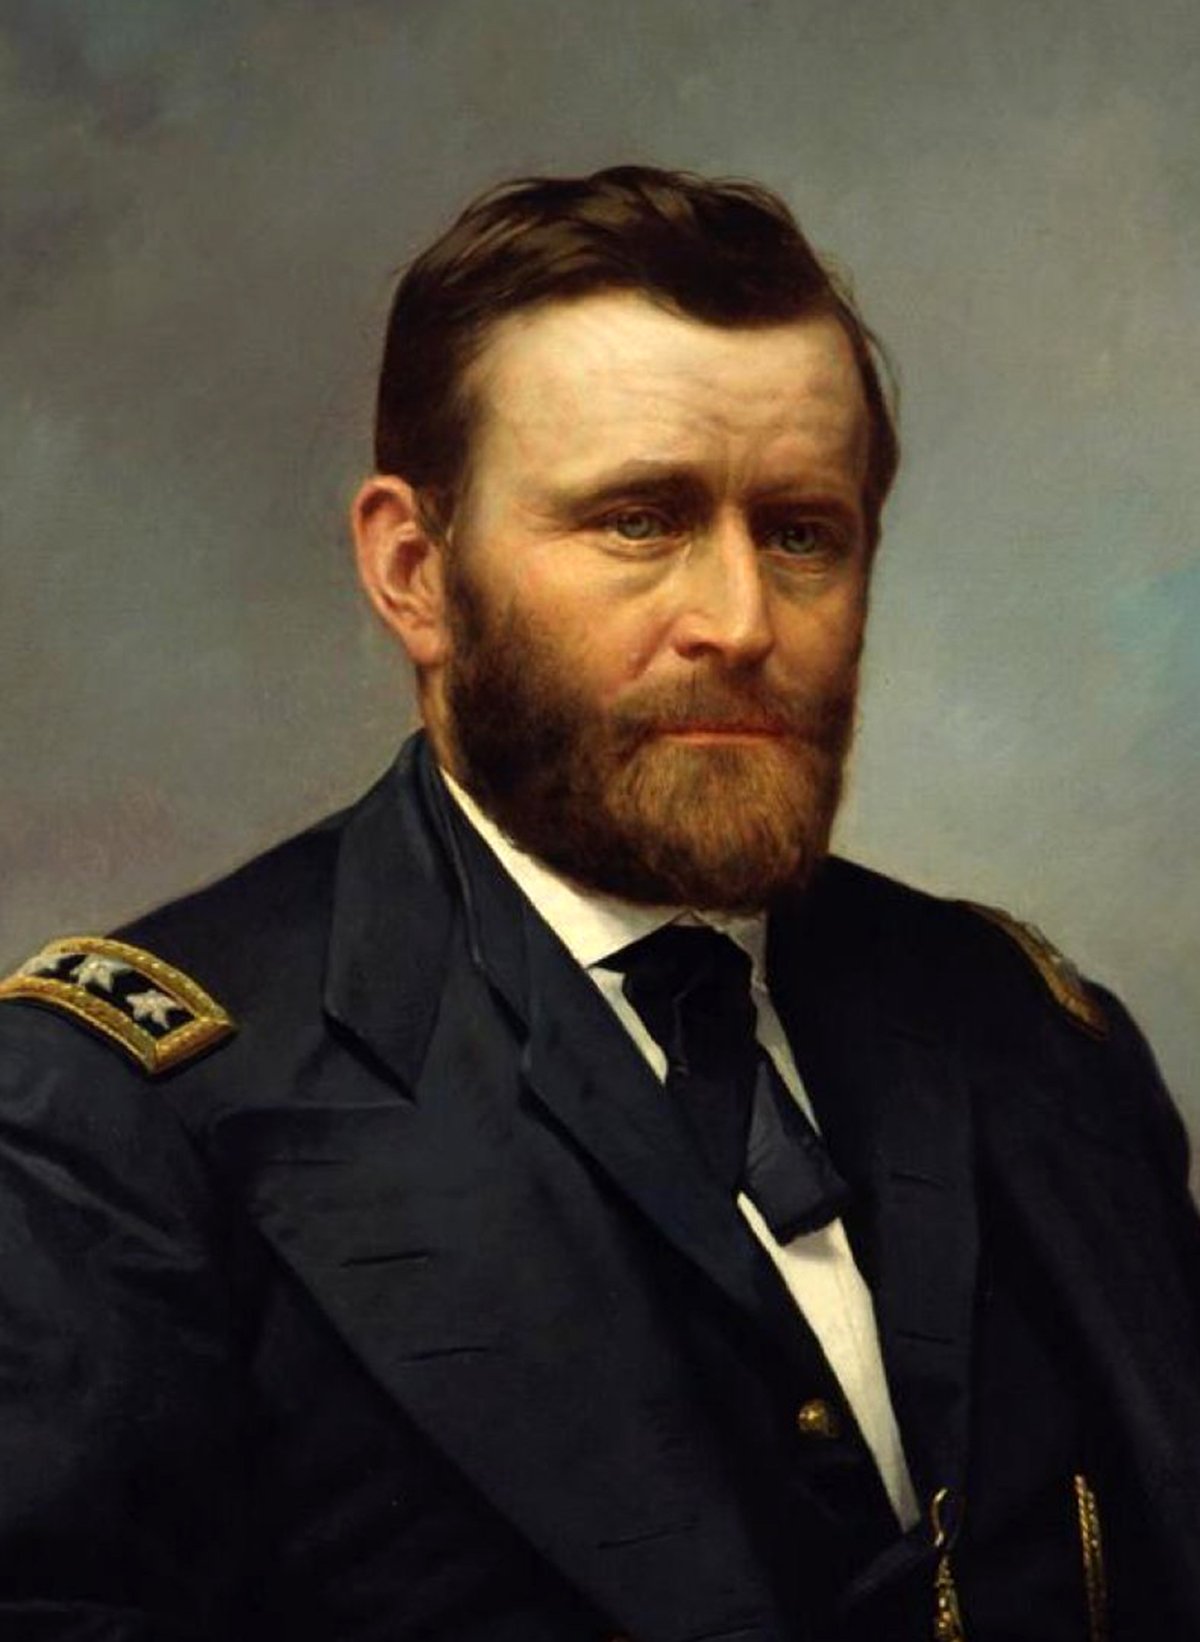 Portrait of Lt. Gen. Ulysses S. Grant by Constant Mayer, 1866, depicting Grant in a navy blue military uniform with gold shoulder straps featuring a three-star insignia, indicative of his rank as Lieutenant General. He has neatly combed hair, a full beard, and a serious expression. The background is a nondescript, muted shade, putting the focus on Grant’s visage and uniform.